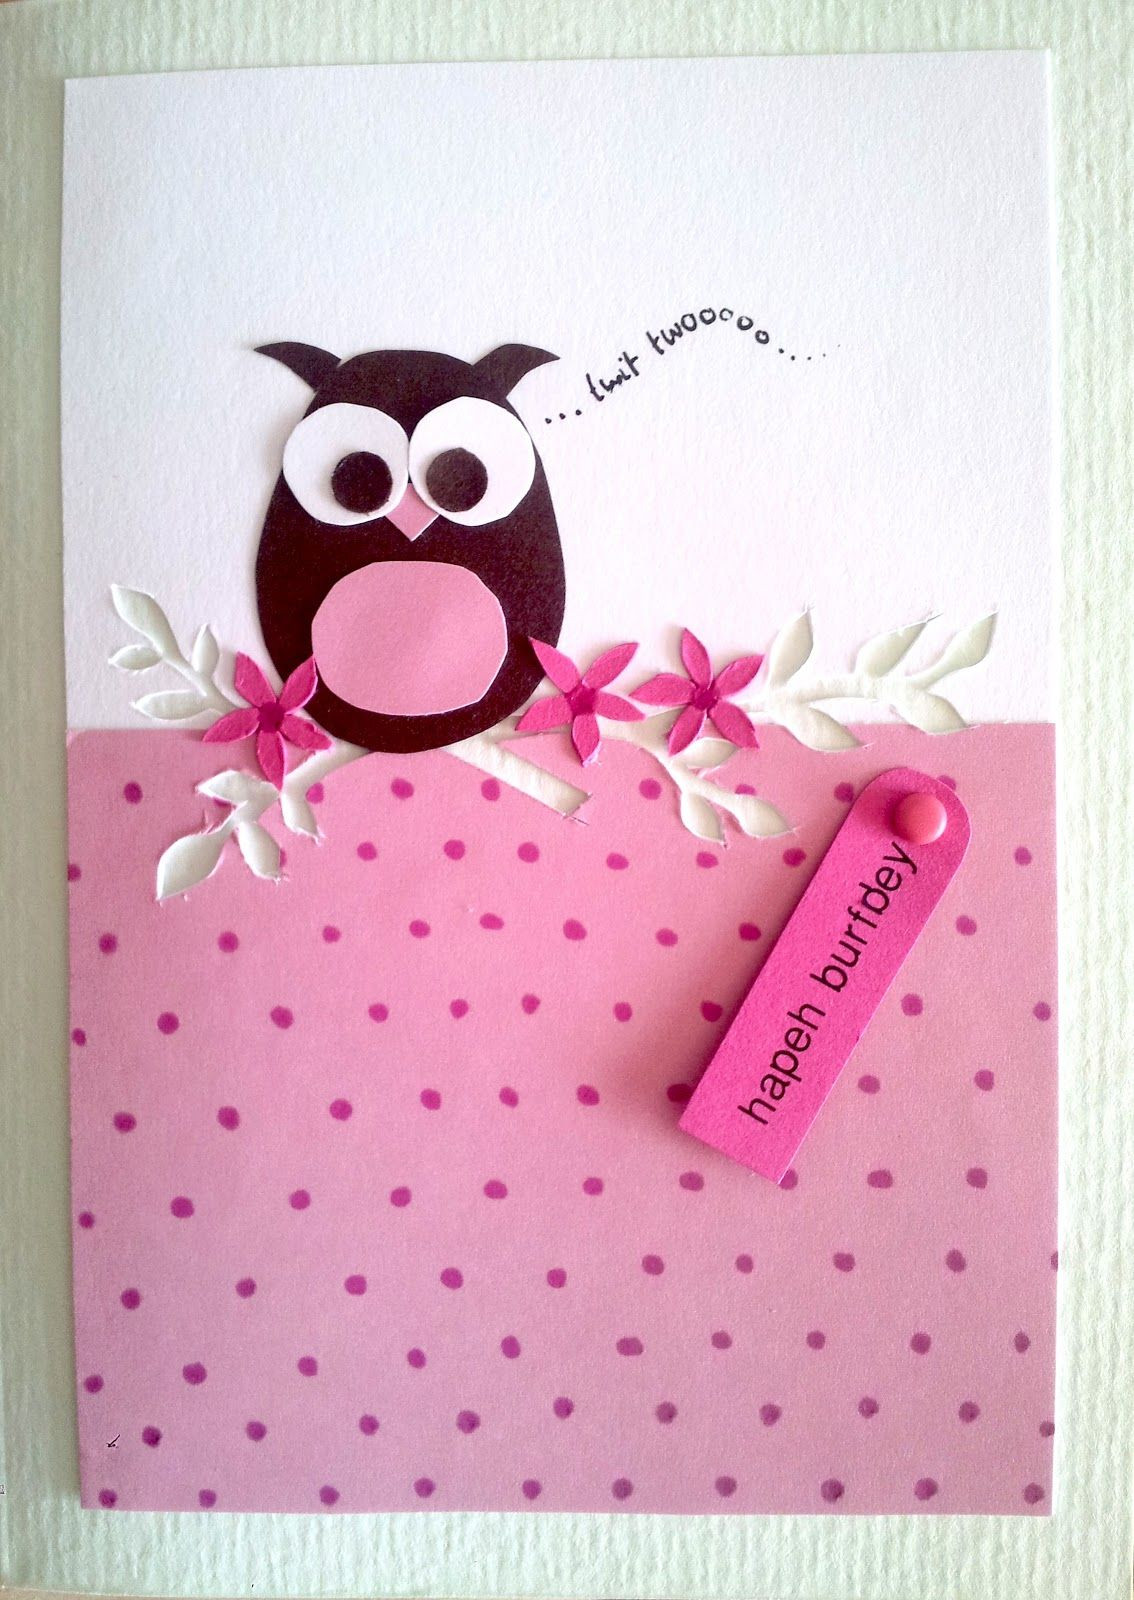 Free Birthday Cards For Sister
 Cute Owl Birthday Cards For Sister With Pink Polka Dot